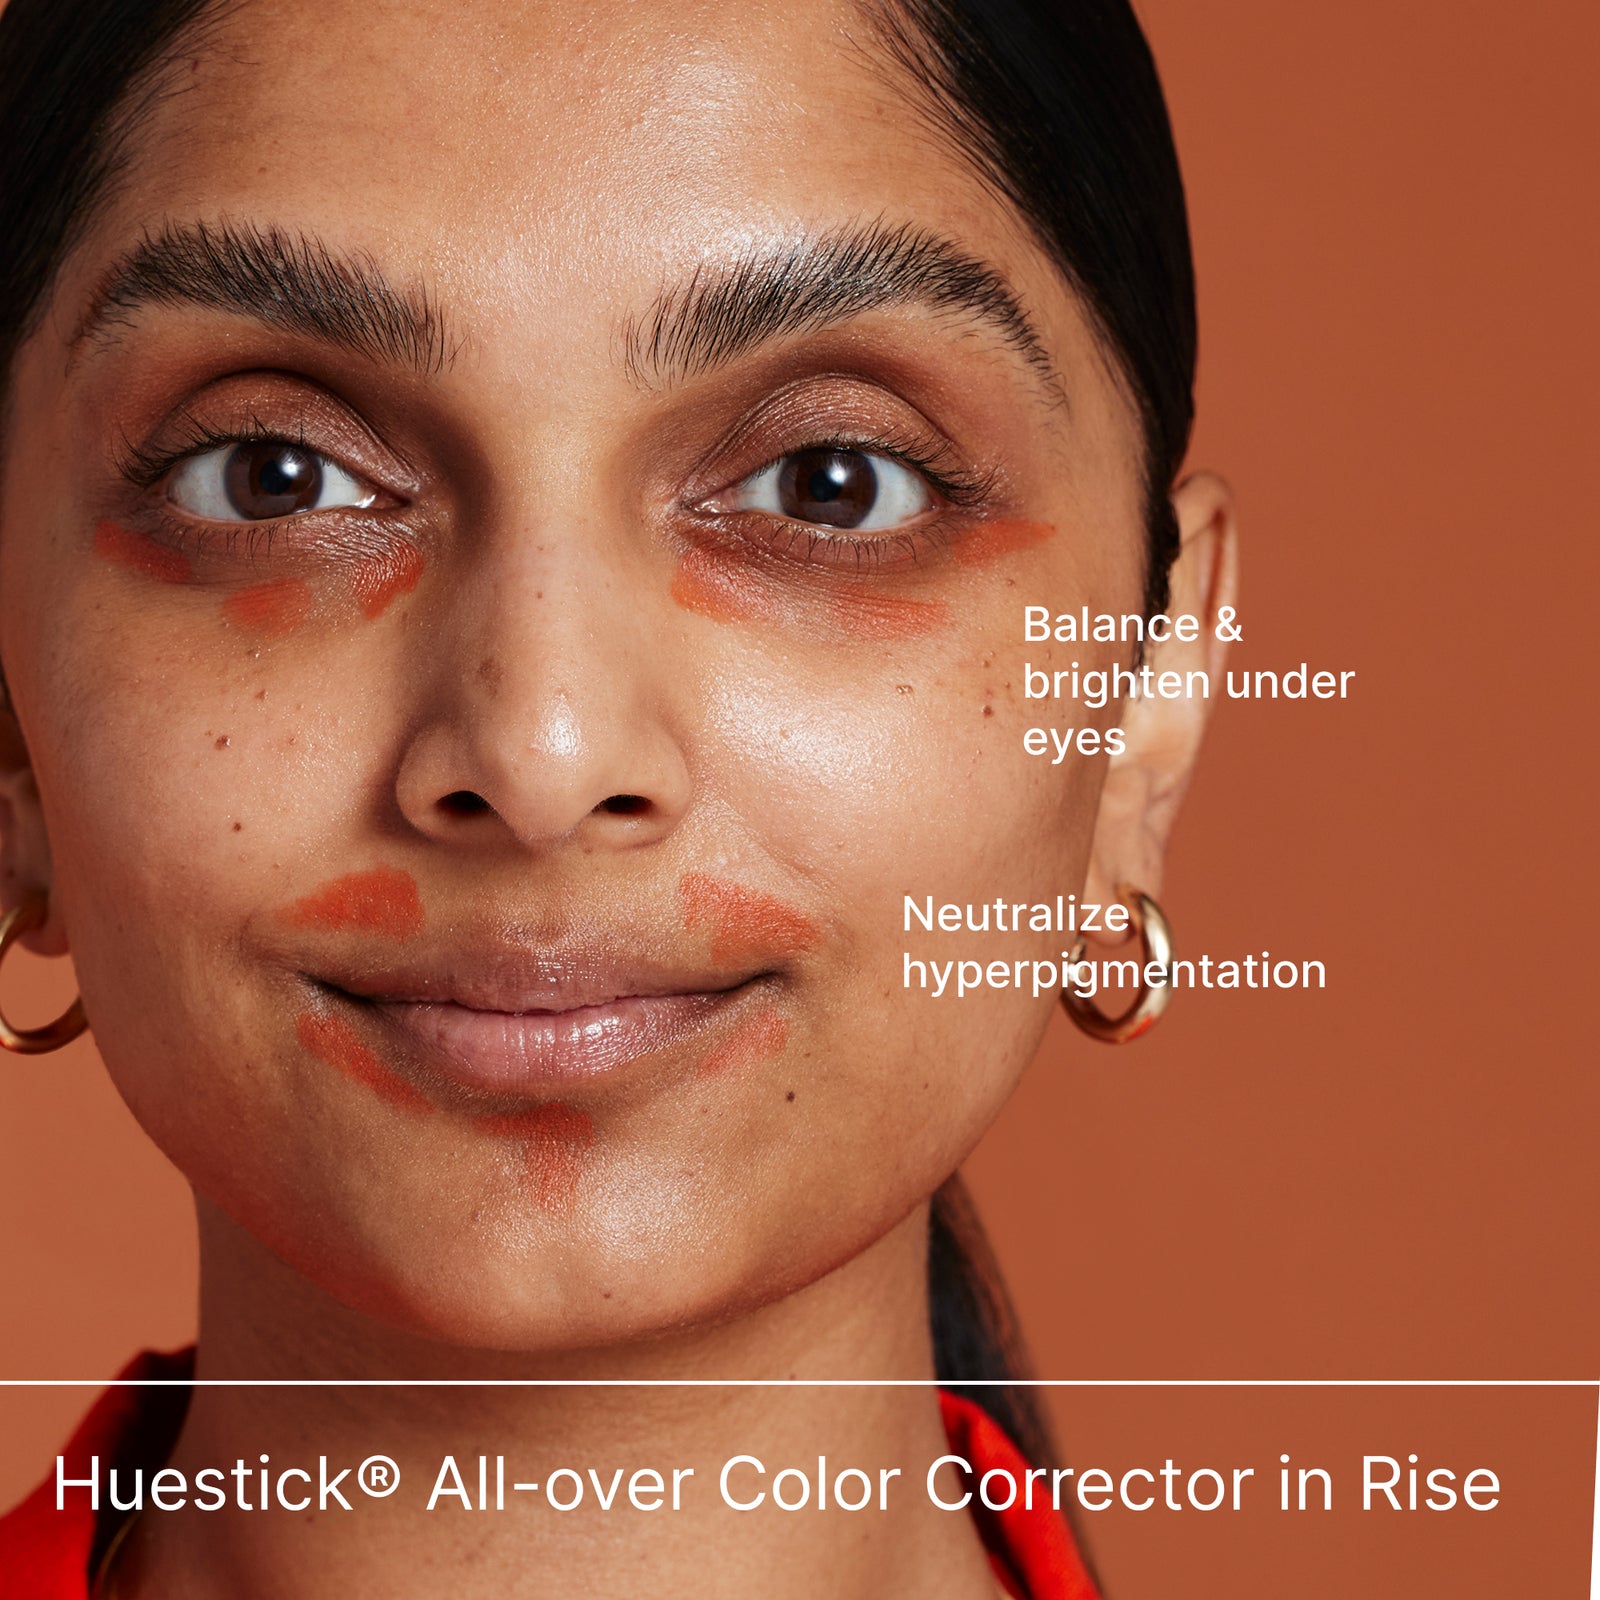 All-over Color Corrector in Rise